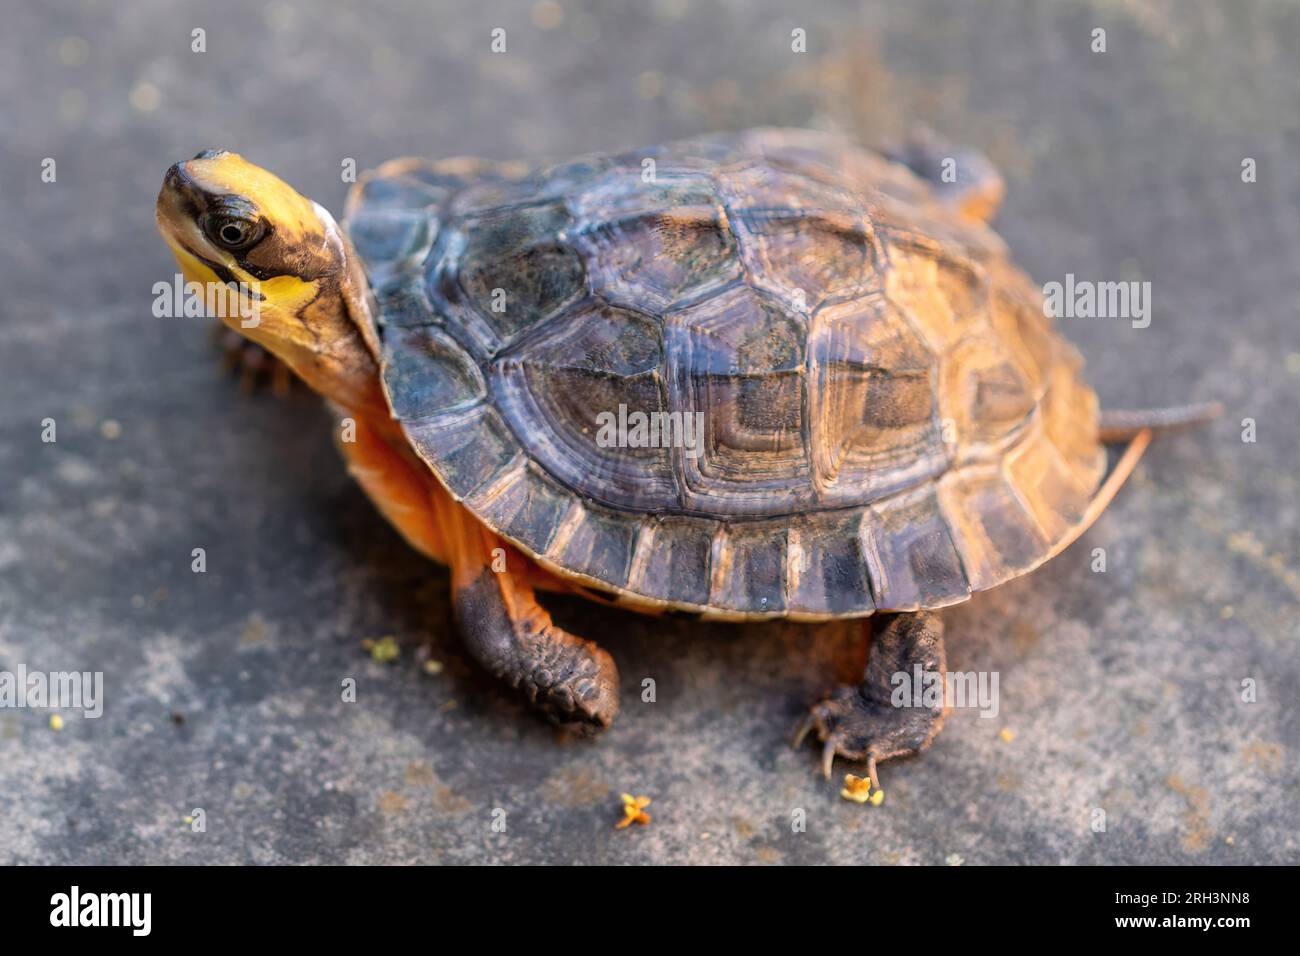 The Golden Coin Turtle a.k.a. Chinese Three-striped box turtle. Stock Photo